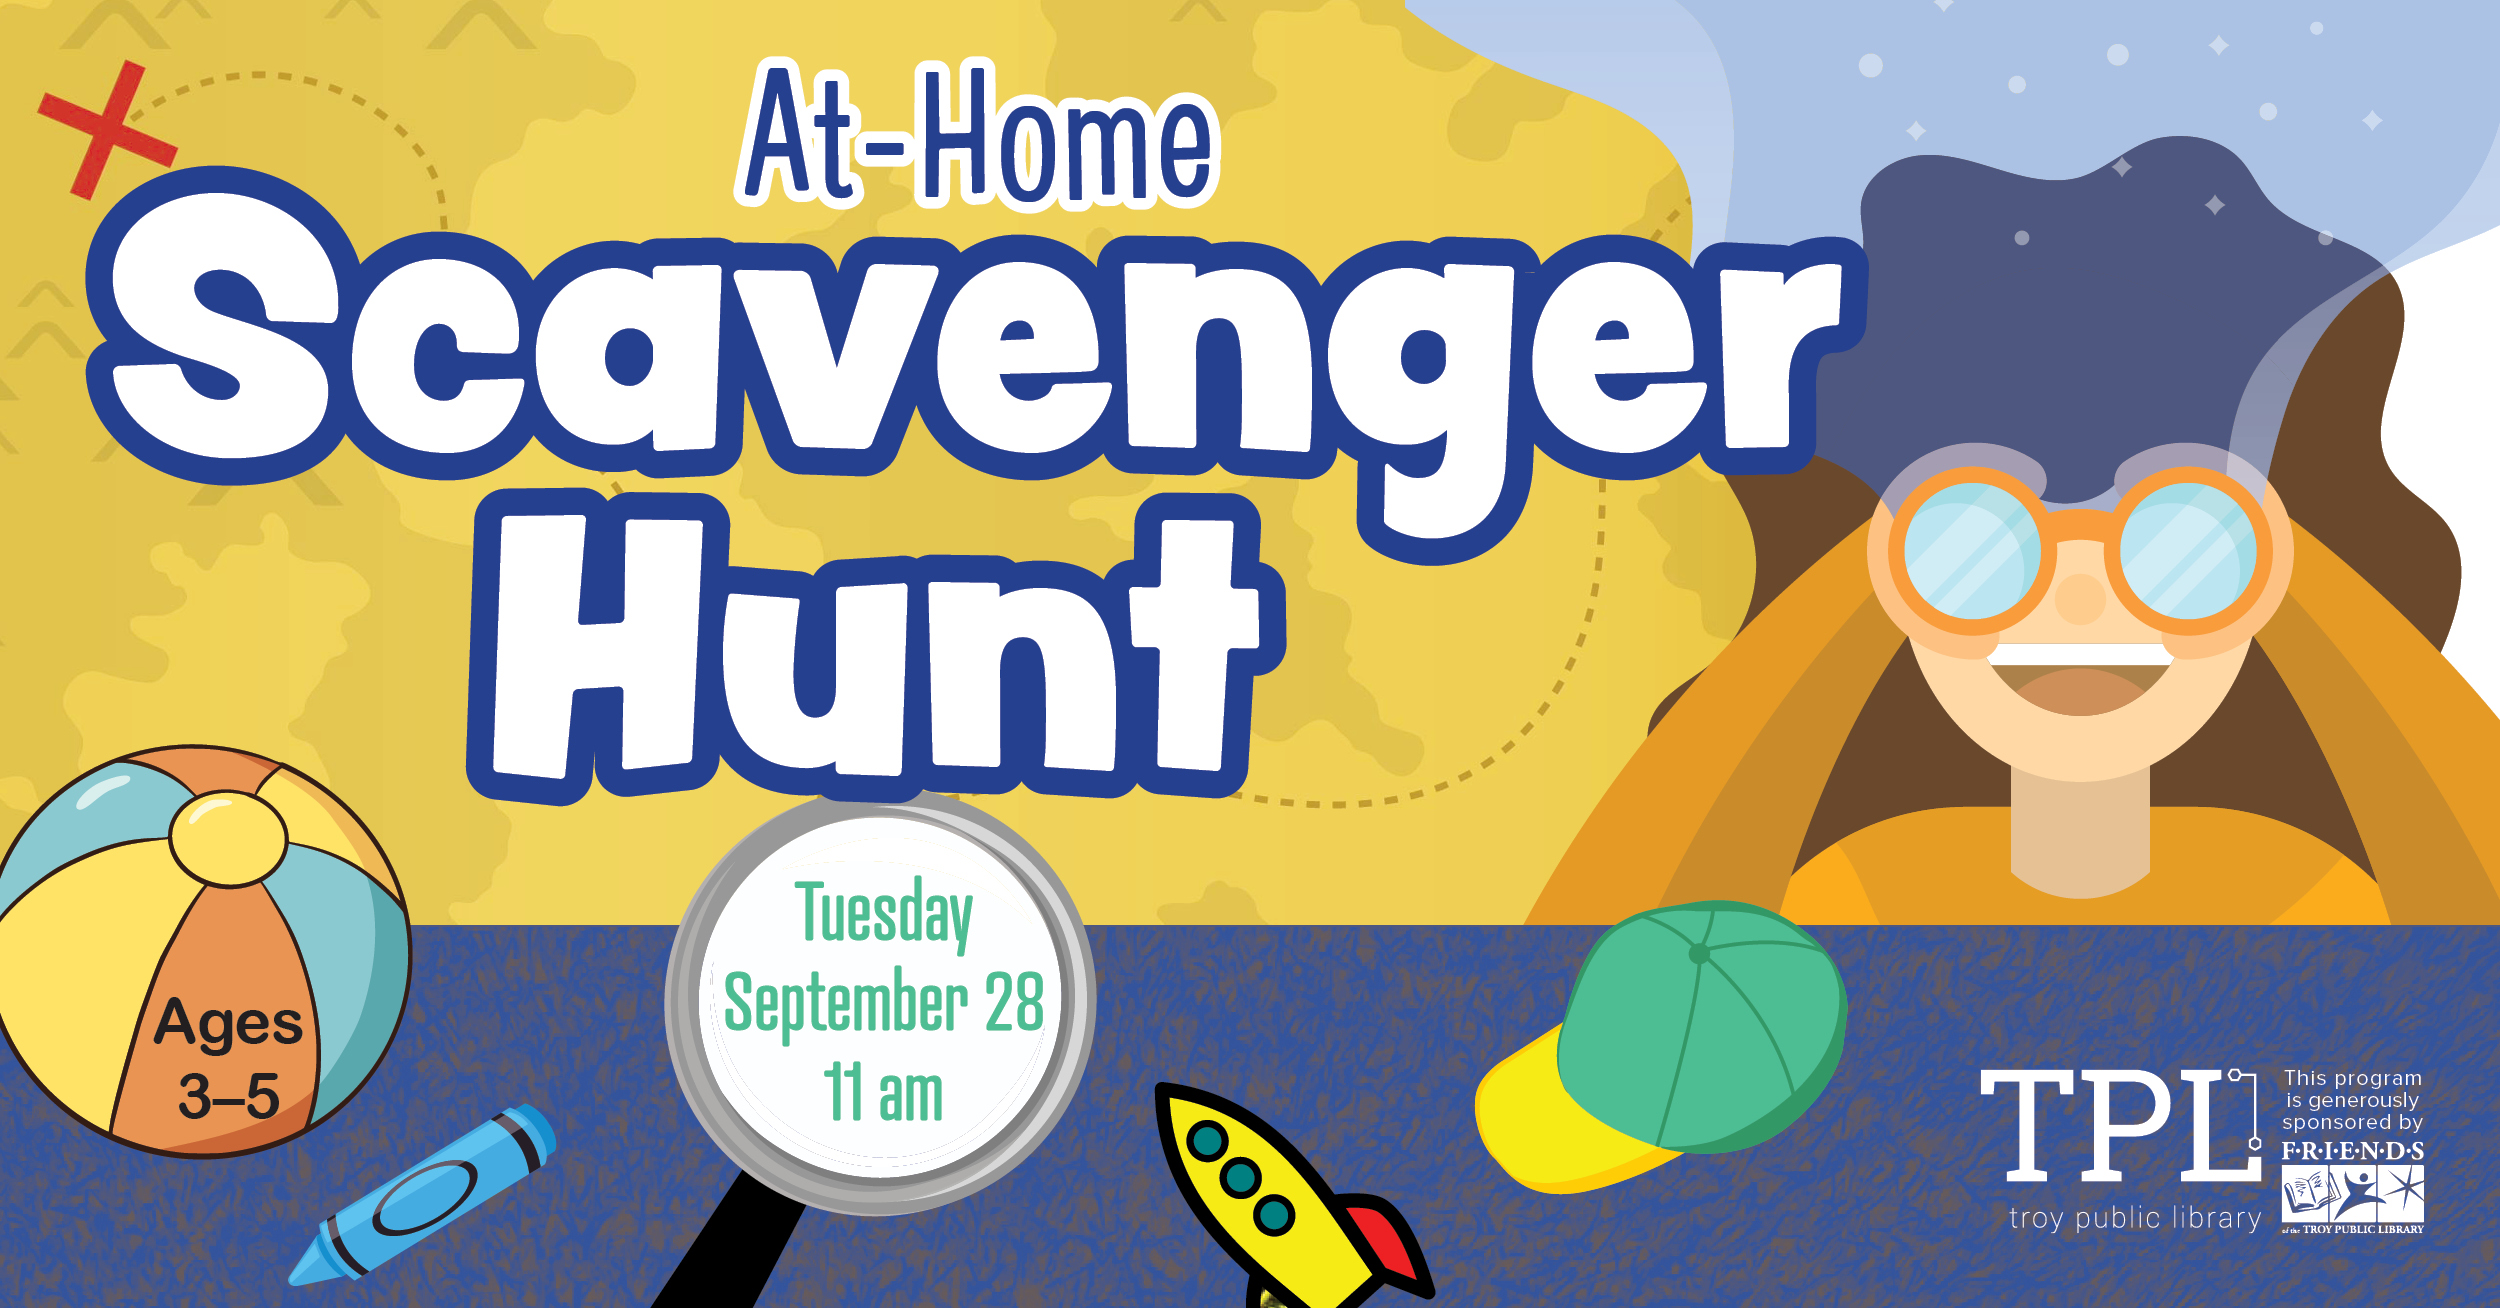 At-Home Scavenger Hunt Ages three to five. Tuesday, September 28 at 11 am. Sponsored by the Friend of the Troy Public Library. 